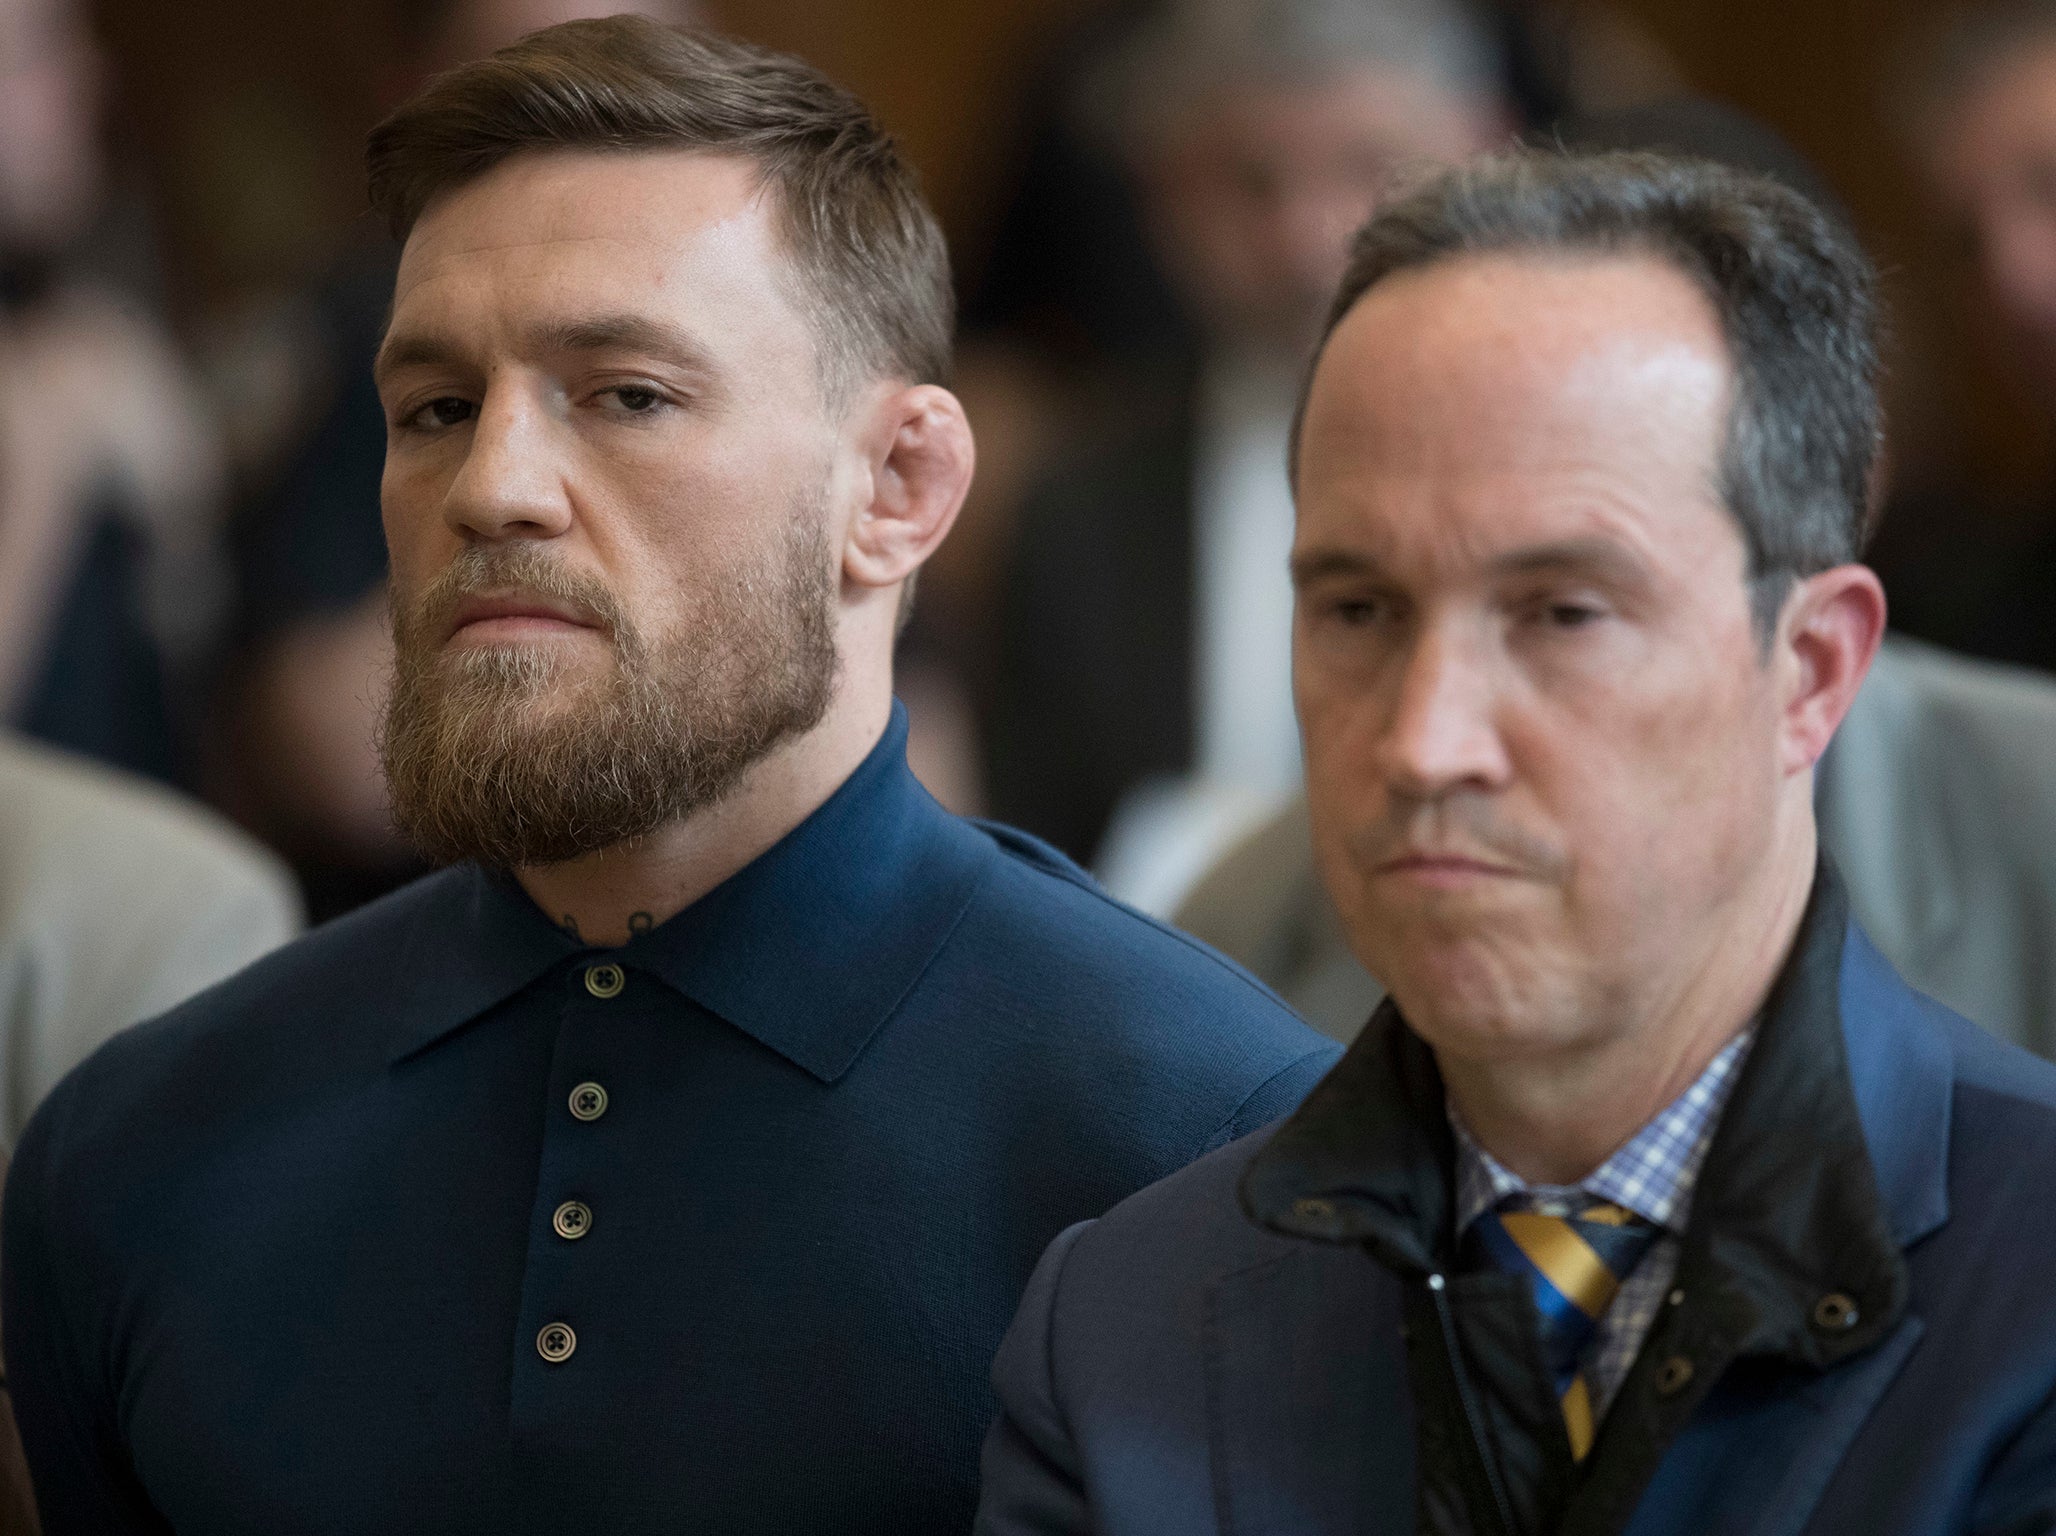 Conor McGregor is currently out on bail